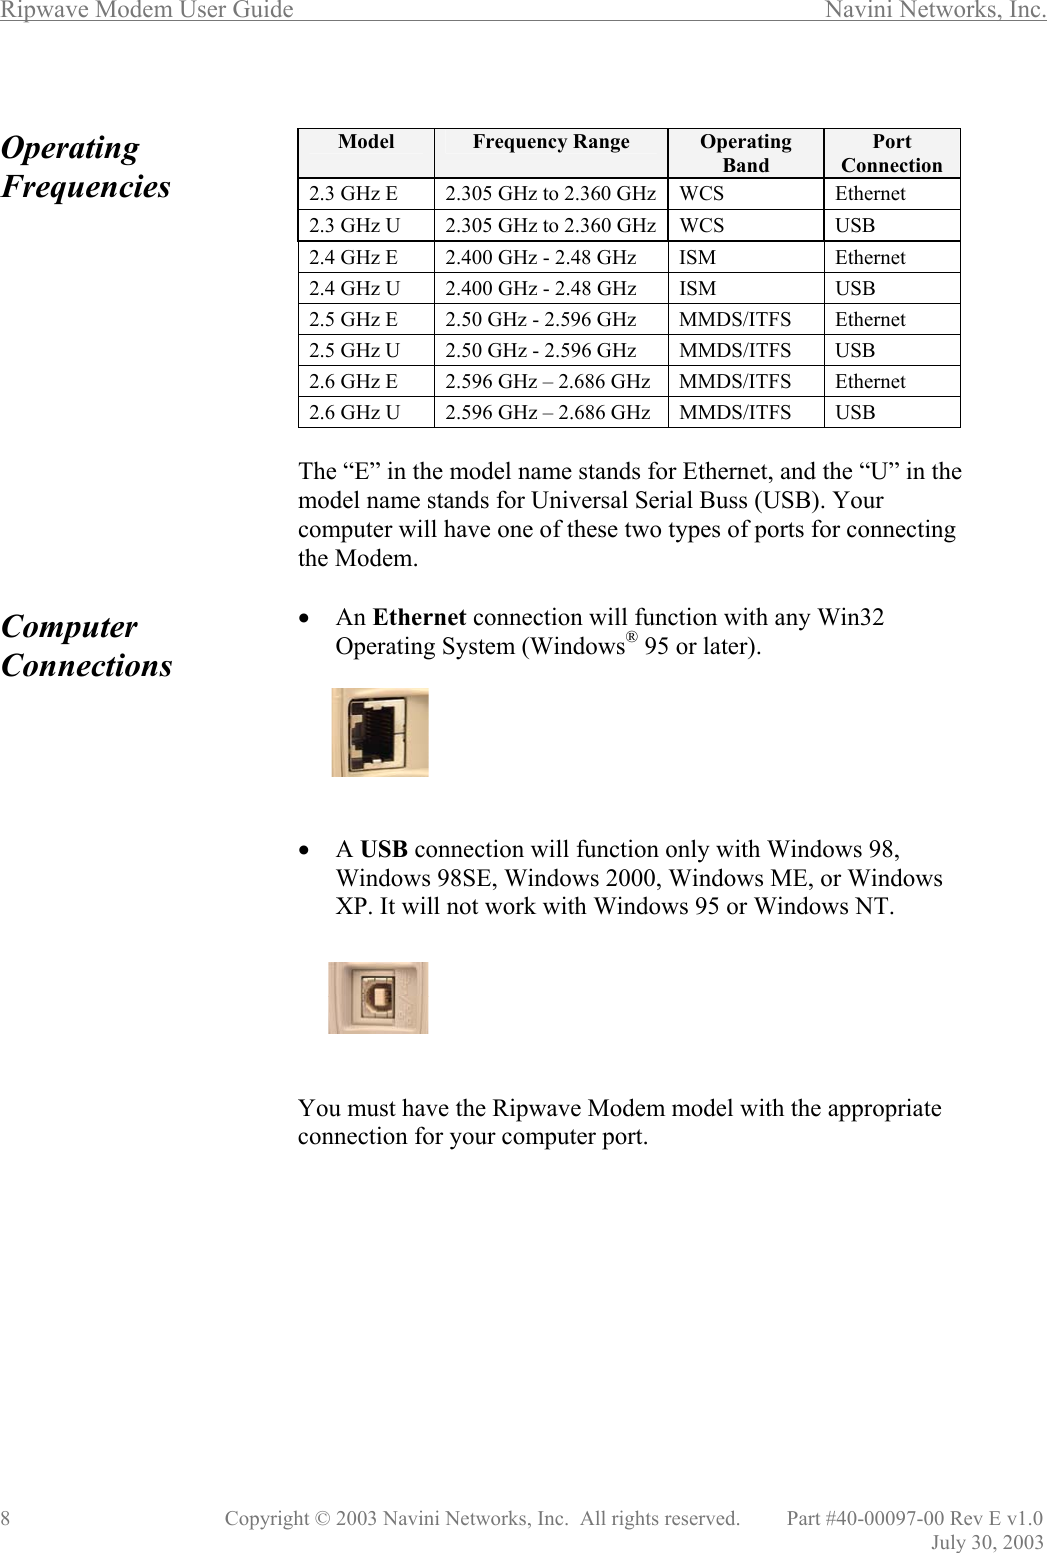 Ripwave Modem User Guide        Navini Networks, Inc. 8      Copyright © 2003 Navini Networks, Inc.  All rights reserved.         Part #40-00097-00 Rev E v1.0                   July 30, 2003  Operating Frequencies               Computer Connections                            Model  Frequency Range  Operating Band Port Connection 2.3 GHz E  2.305 GHz to 2.360 GHz  WCS  Ethernet 2.3 GHz U  2.305 GHz to 2.360 GHz  WCS  USB 2.4 GHz E   2.400 GHz - 2.48 GHz  ISM  Ethernet 2.4 GHz U   2.400 GHz - 2.48 GHz  ISM  USB 2.5 GHz E  2.50 GHz - 2.596 GHz  MMDS/ITFS  Ethernet 2.5 GHz U  2.50 GHz - 2.596 GHz  MMDS/ITFS  USB 2.6 GHz E   2.596 GHz – 2.686 GHz  MMDS/ITFS   Ethernet 2.6 GHz U   2.596 GHz – 2.686 GHz  MMDS/ITFS   USB  The “E” in the model name stands for Ethernet, and the “U” in the model name stands for Universal Serial Buss (USB). Your computer will have one of these two types of ports for connecting the Modem.   •  An Ethernet connection will function with any Win32 Operating System (Windows® 95 or later).        •  A USB connection will function only with Windows 98, Windows 98SE, Windows 2000, Windows ME, or Windows  XP. It will not work with Windows 95 or Windows NT.       You must have the Ripwave Modem model with the appropriate connection for your computer port.            